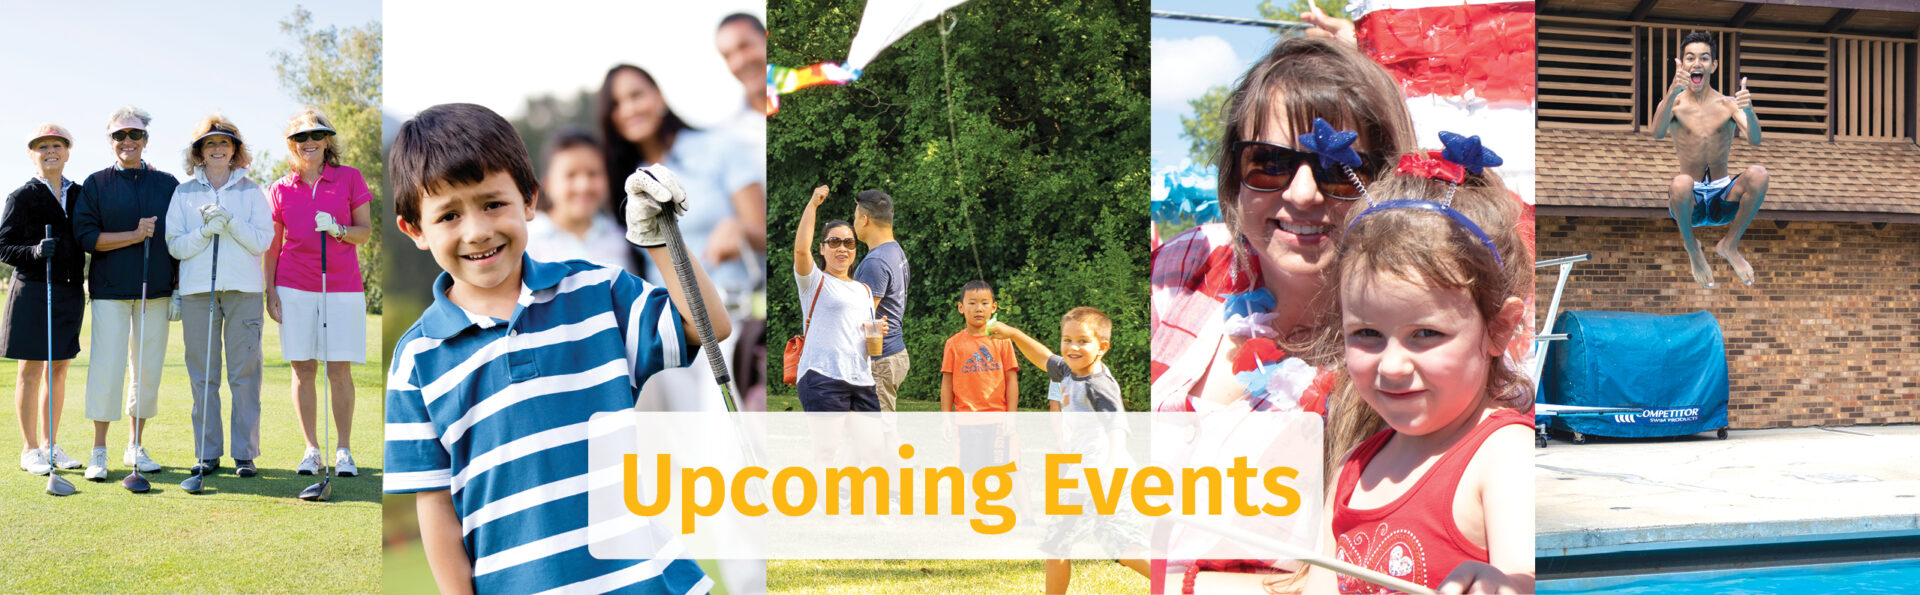 Upcoming Events! Women golfing, boy golfing with family, boy flying a kite, a mother and daughter at a parade, a teenager jumping off a diving board.